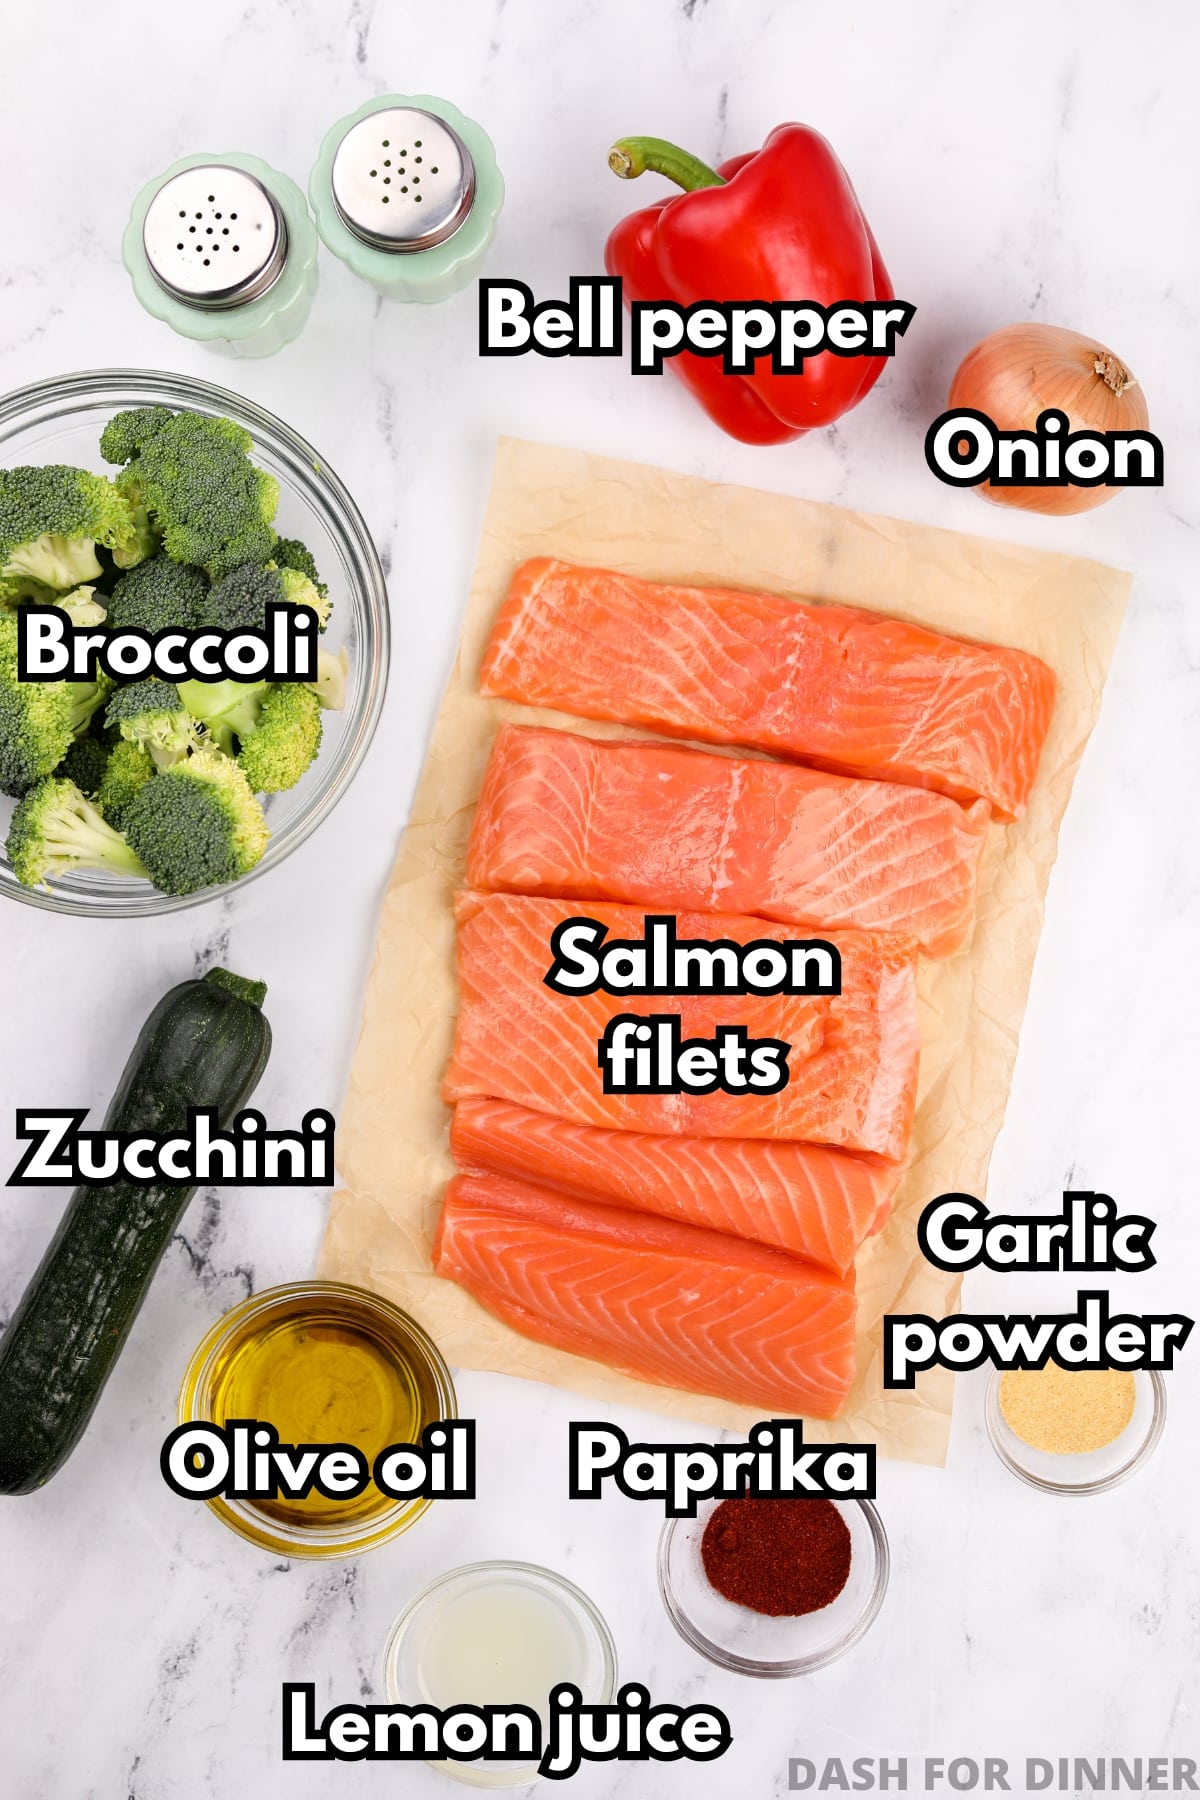 The ingredients needed to make sheet pan salmon with vegetables: salmon fillets, olive oil, broccoli, bell pepper, etc.